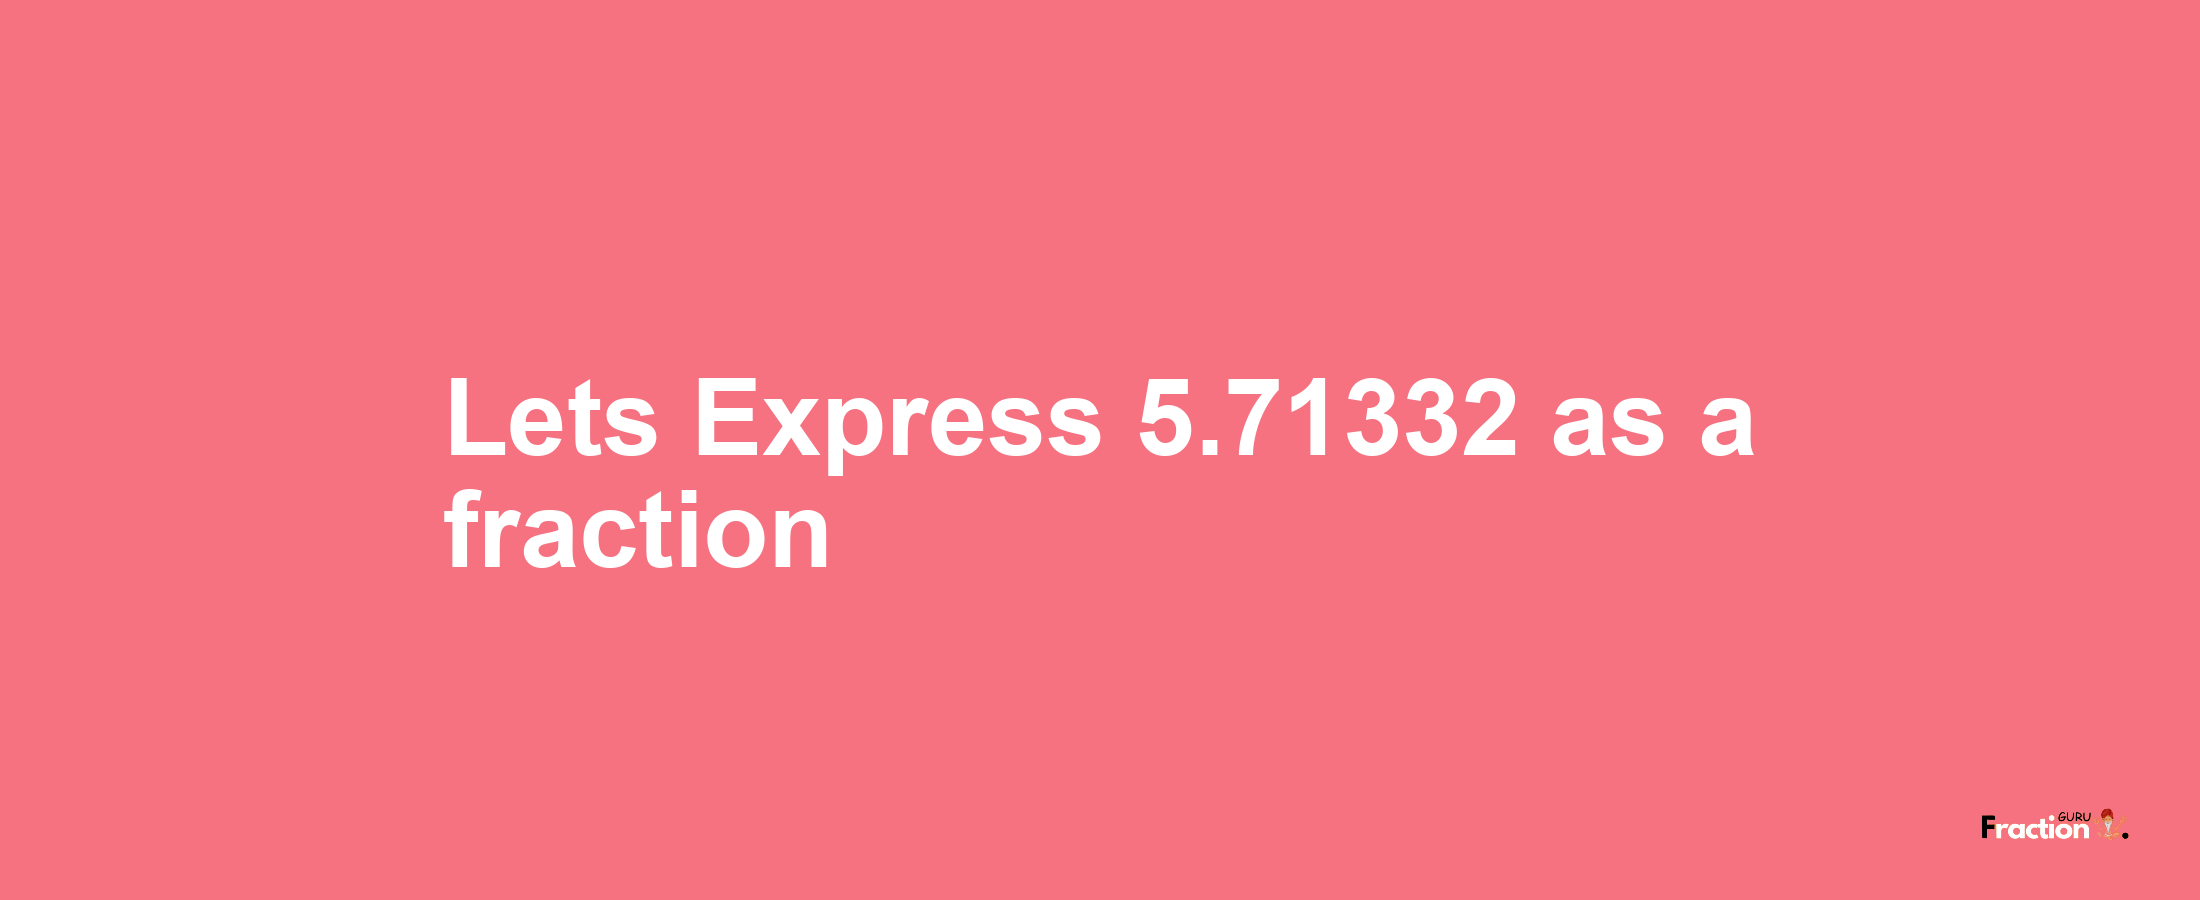 Lets Express 5.71332 as afraction